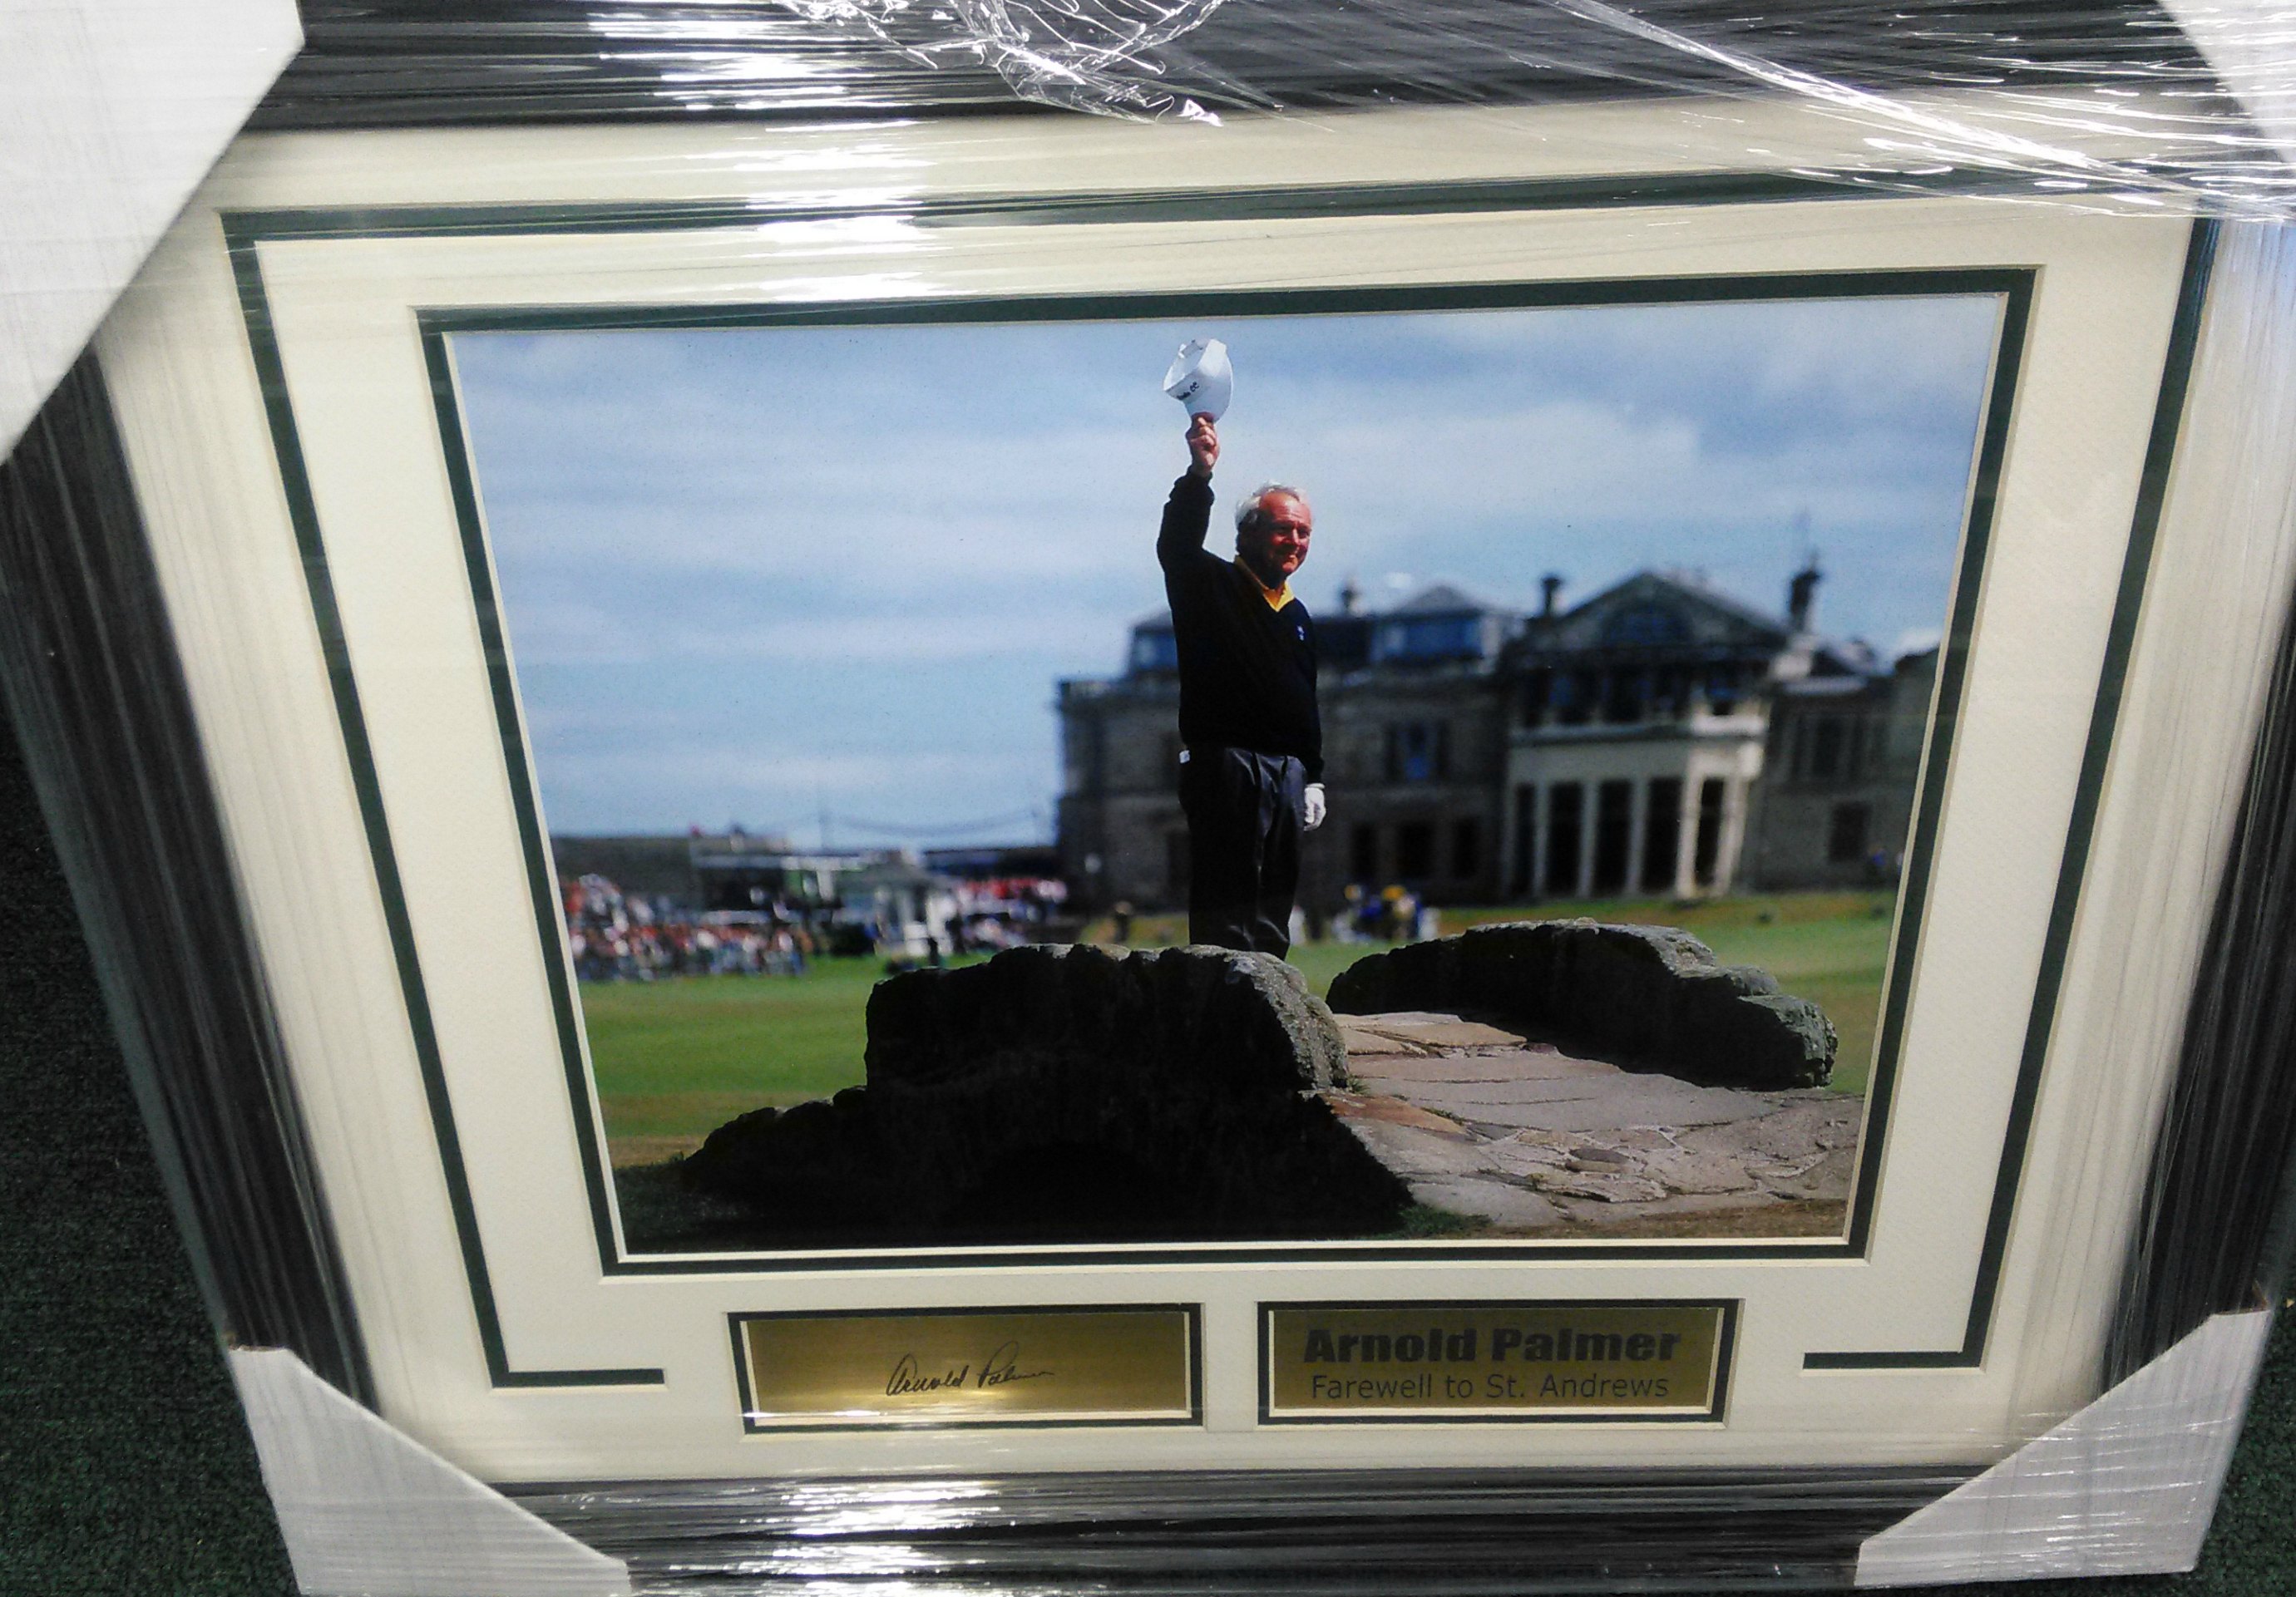 Arnold Palmer Farewell to St. Andrews